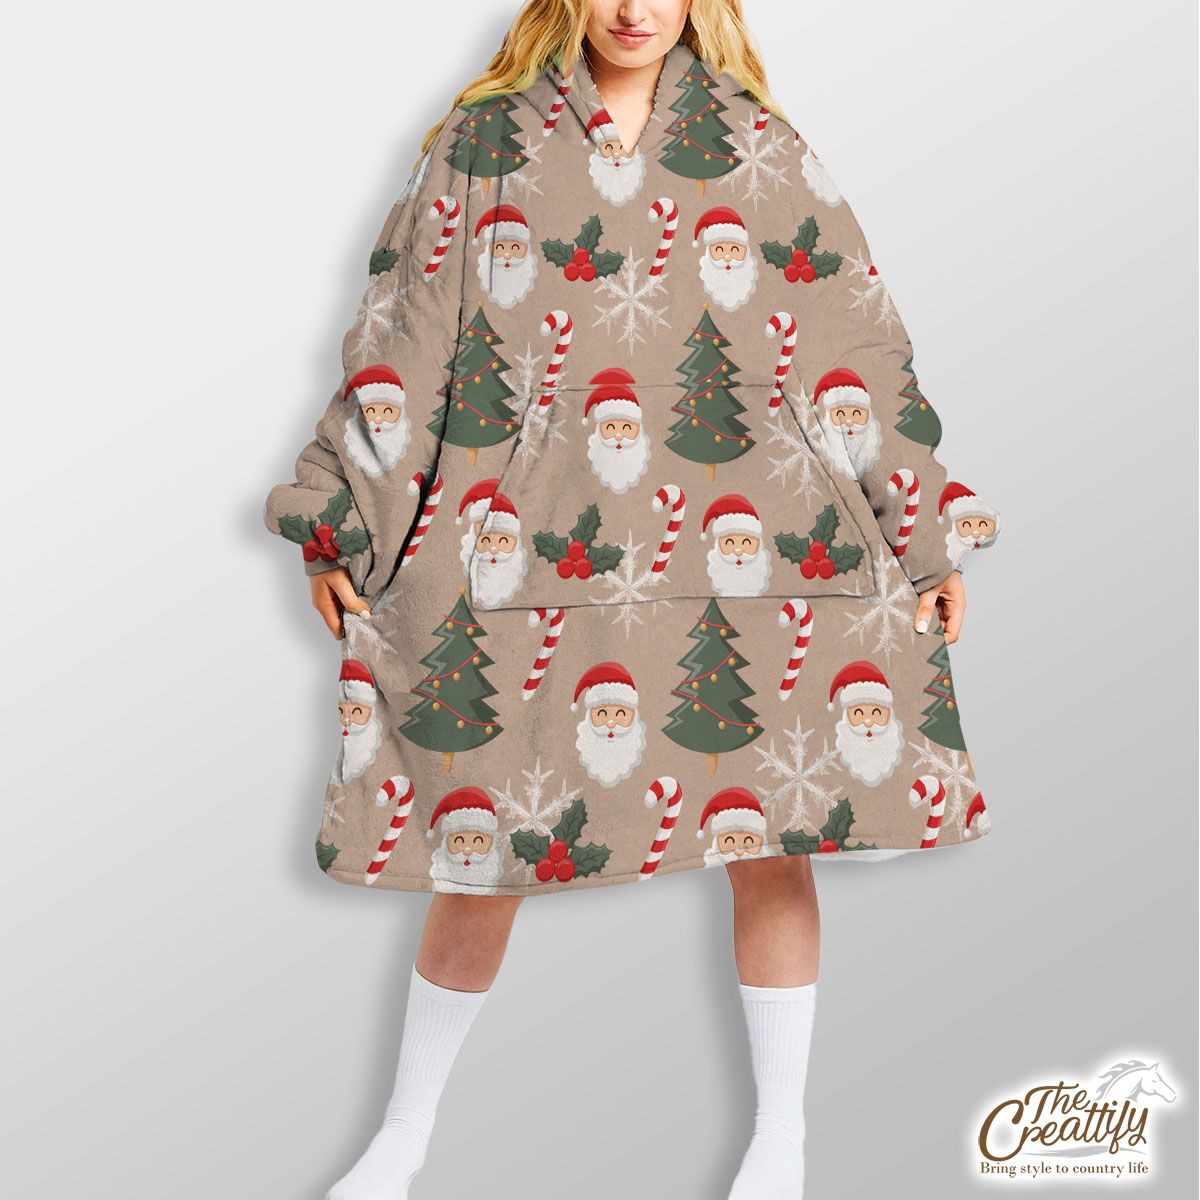 Santa Clause, Christmas Tree, Candy Cane, Holly Leaf On Snowflake Background Hoodie Blanket